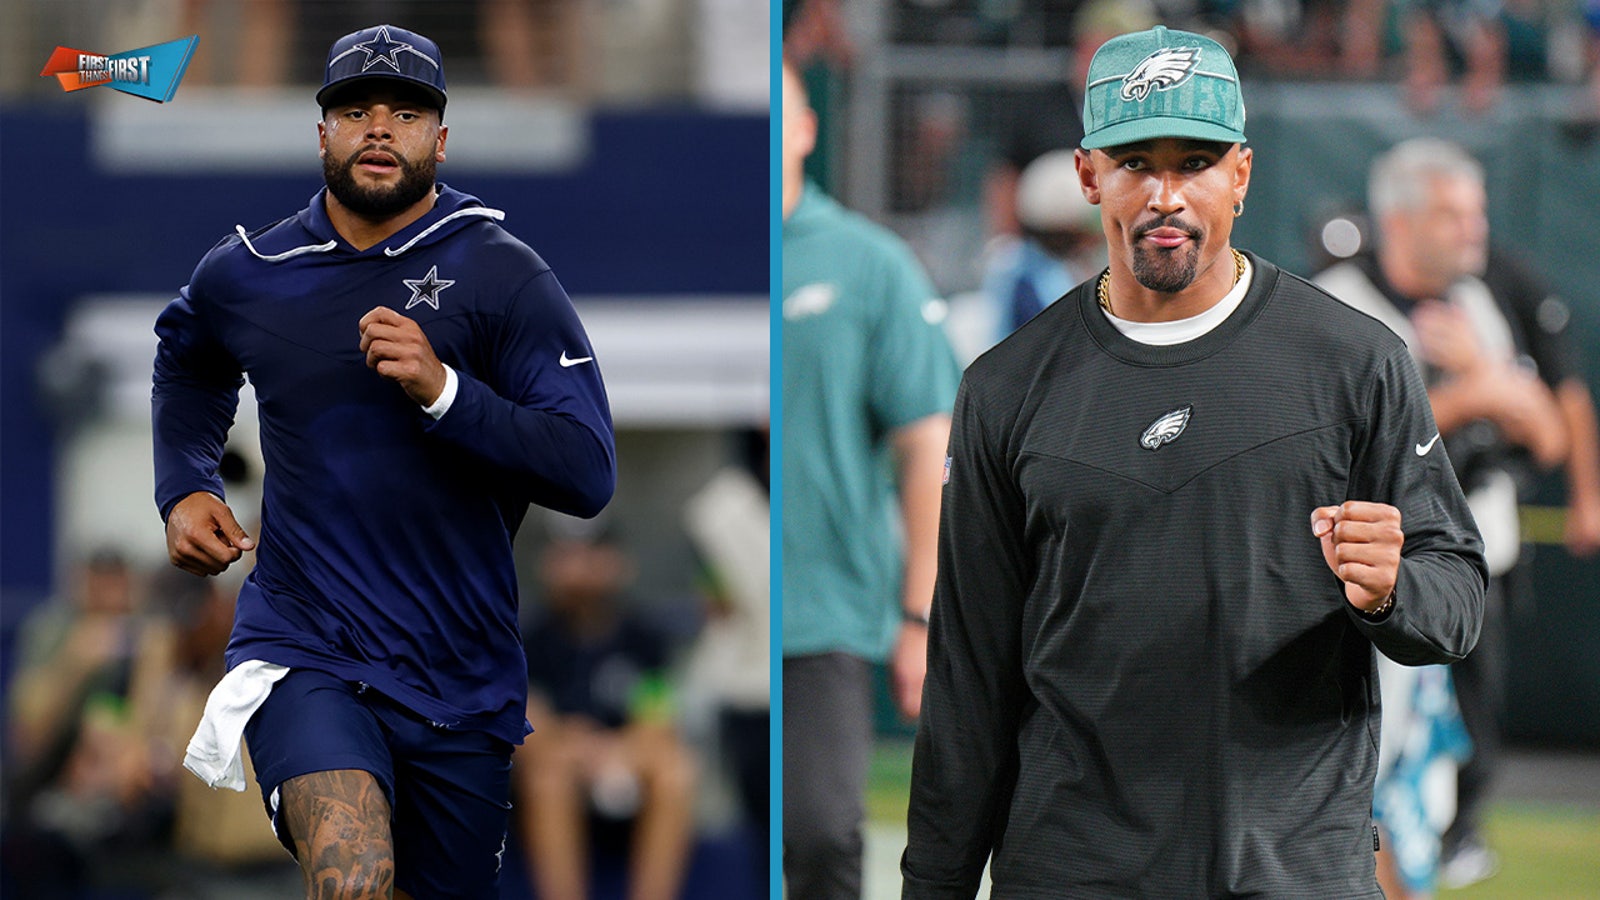 Cowboys vs. Eagles at center of the NFC East debate